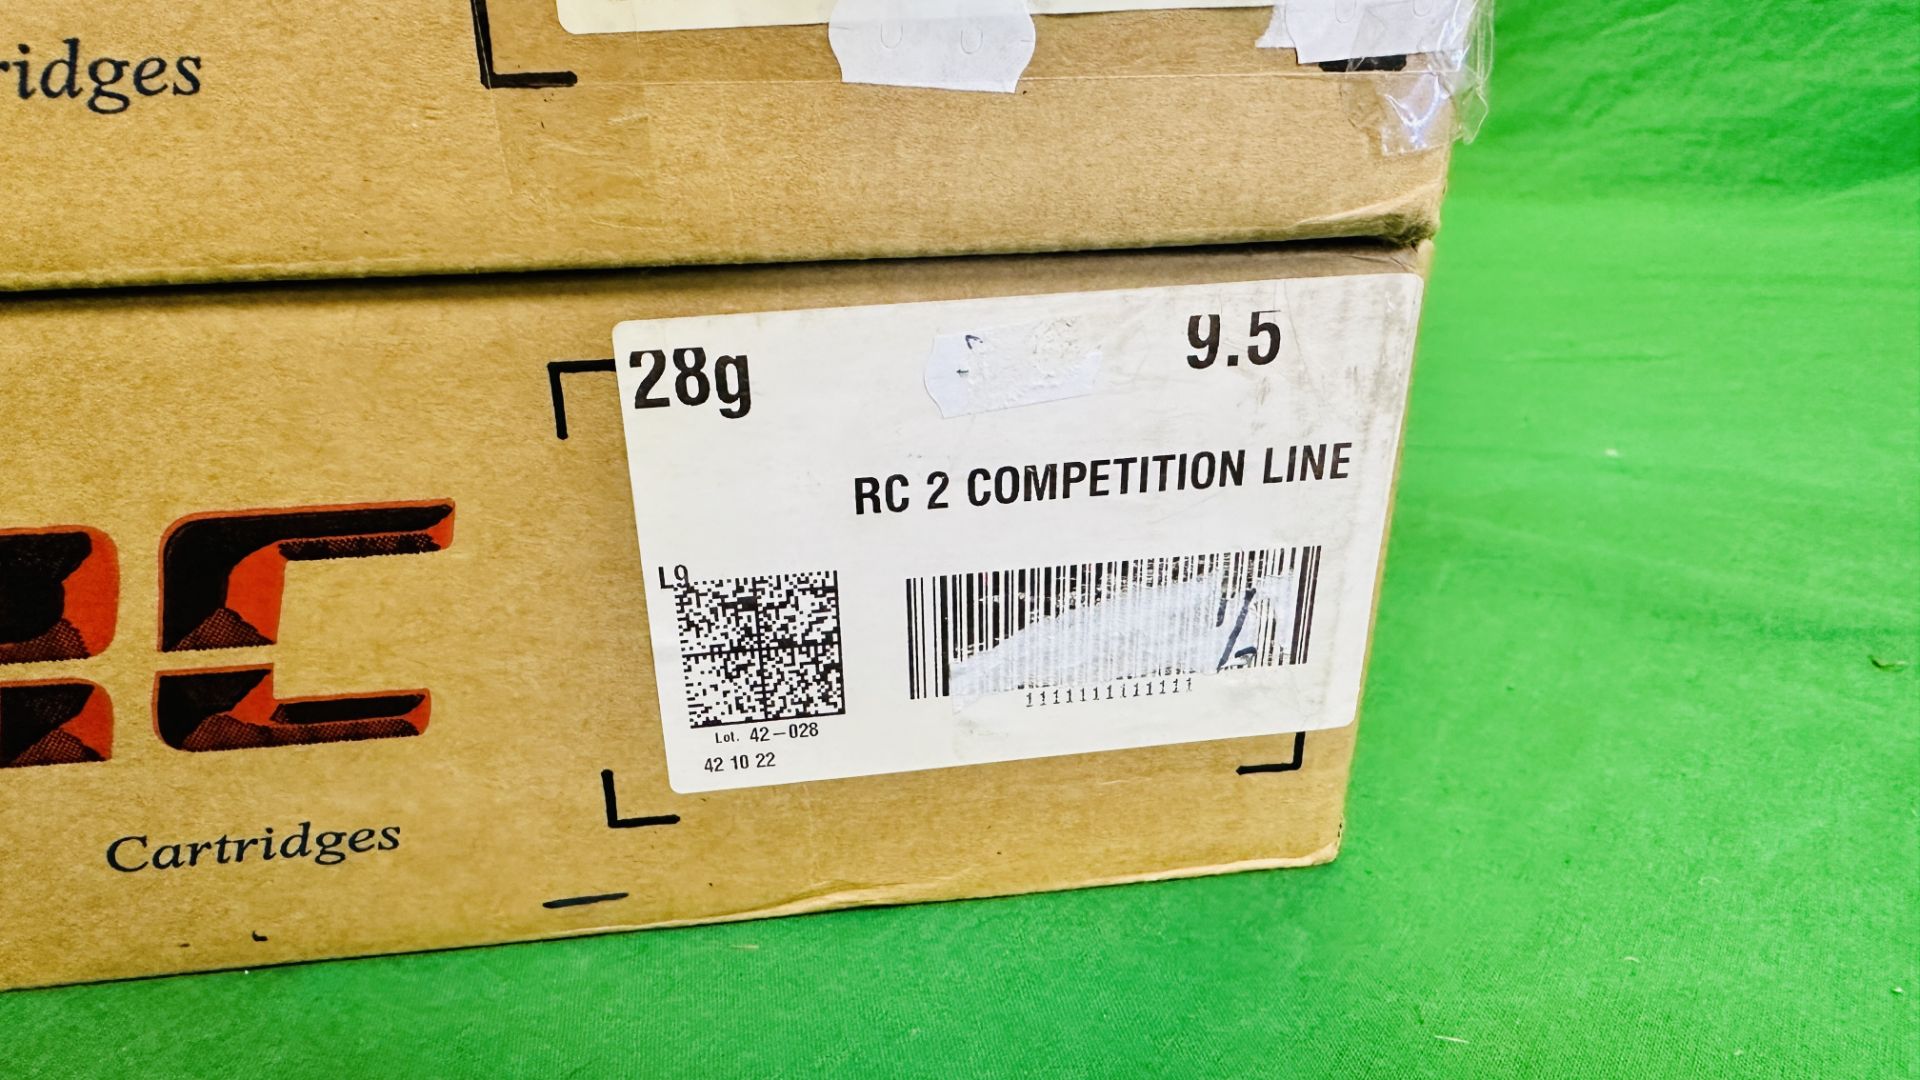 500 X RC 2 COMPETITION LINE 12 GAUGE 28G 9. - Image 3 of 4